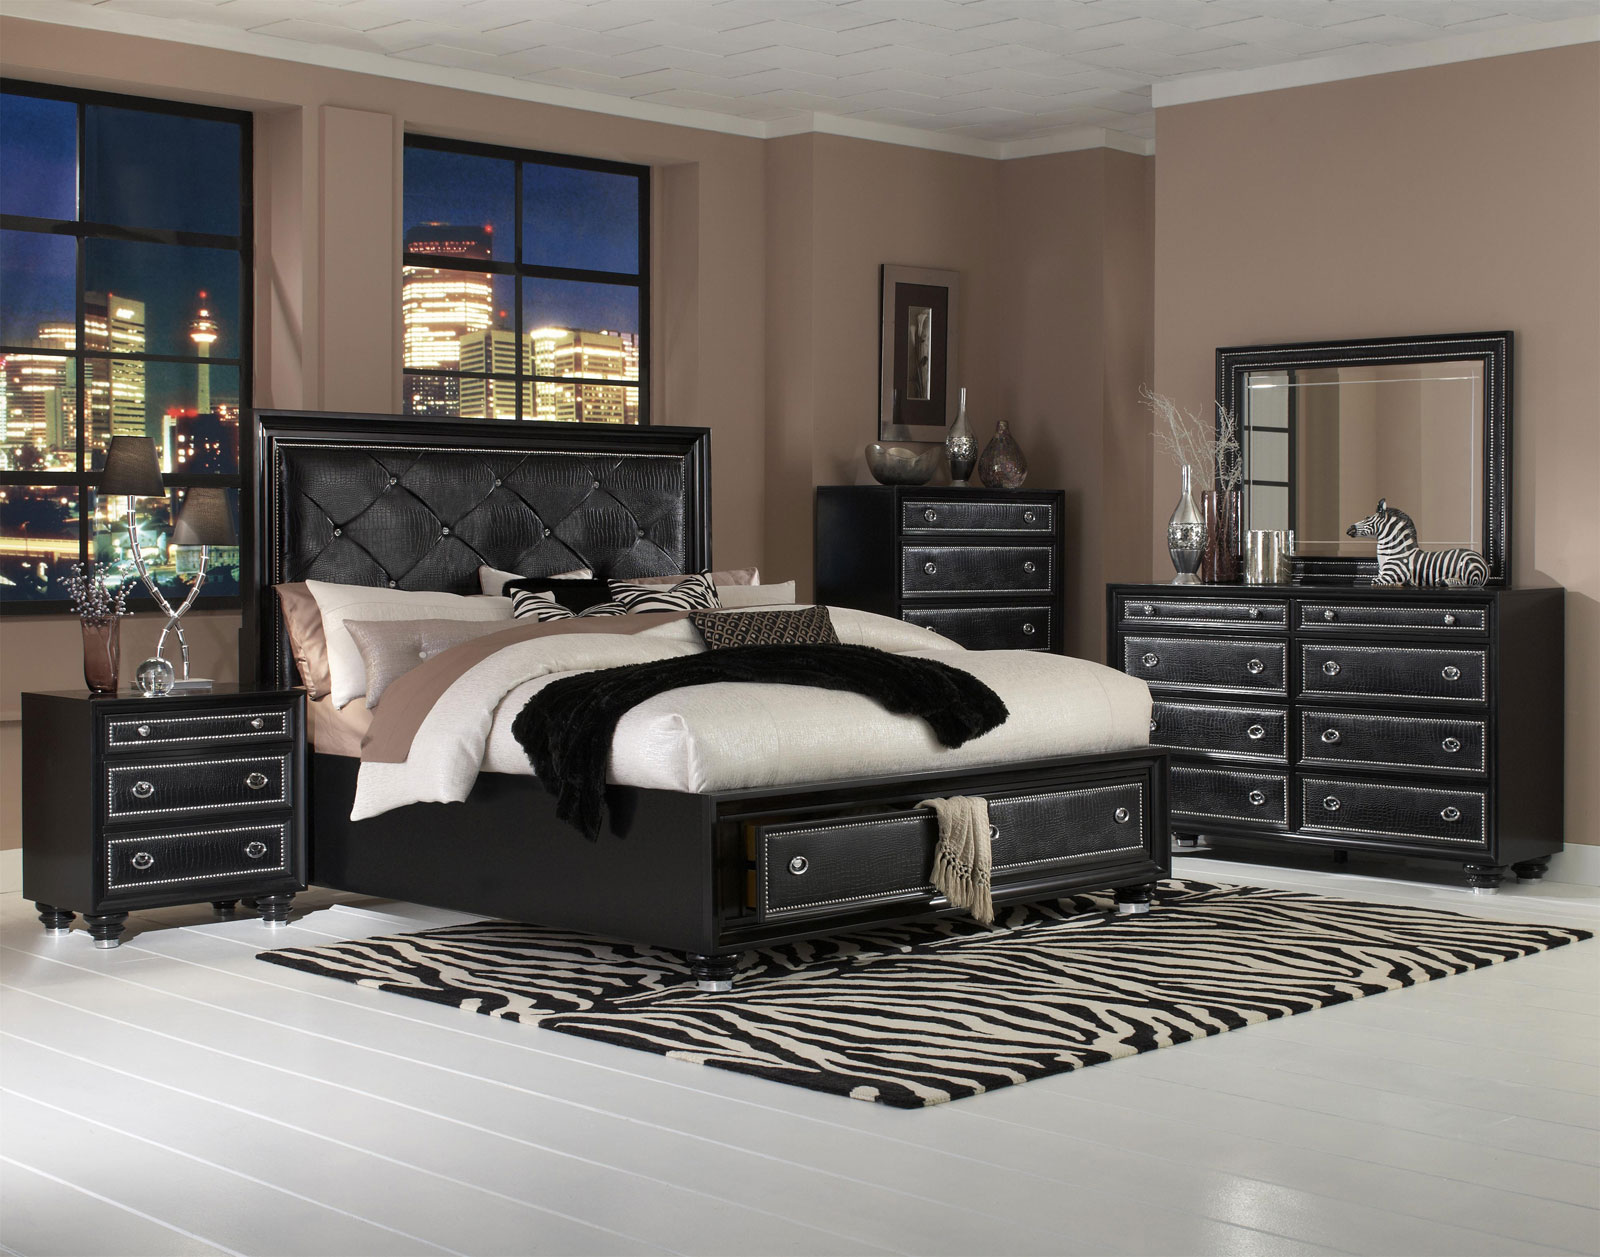 Black Bedroom Modern Astounding Black Bedroom Furniture Of Modern Bedroom With Queen Bed On Platform Drawers Coupled With Nightstand Also Furnished With Drawers And Vanity Completed With Mirror Bedroom Black Bedroom Furniture For The Elegant Sense